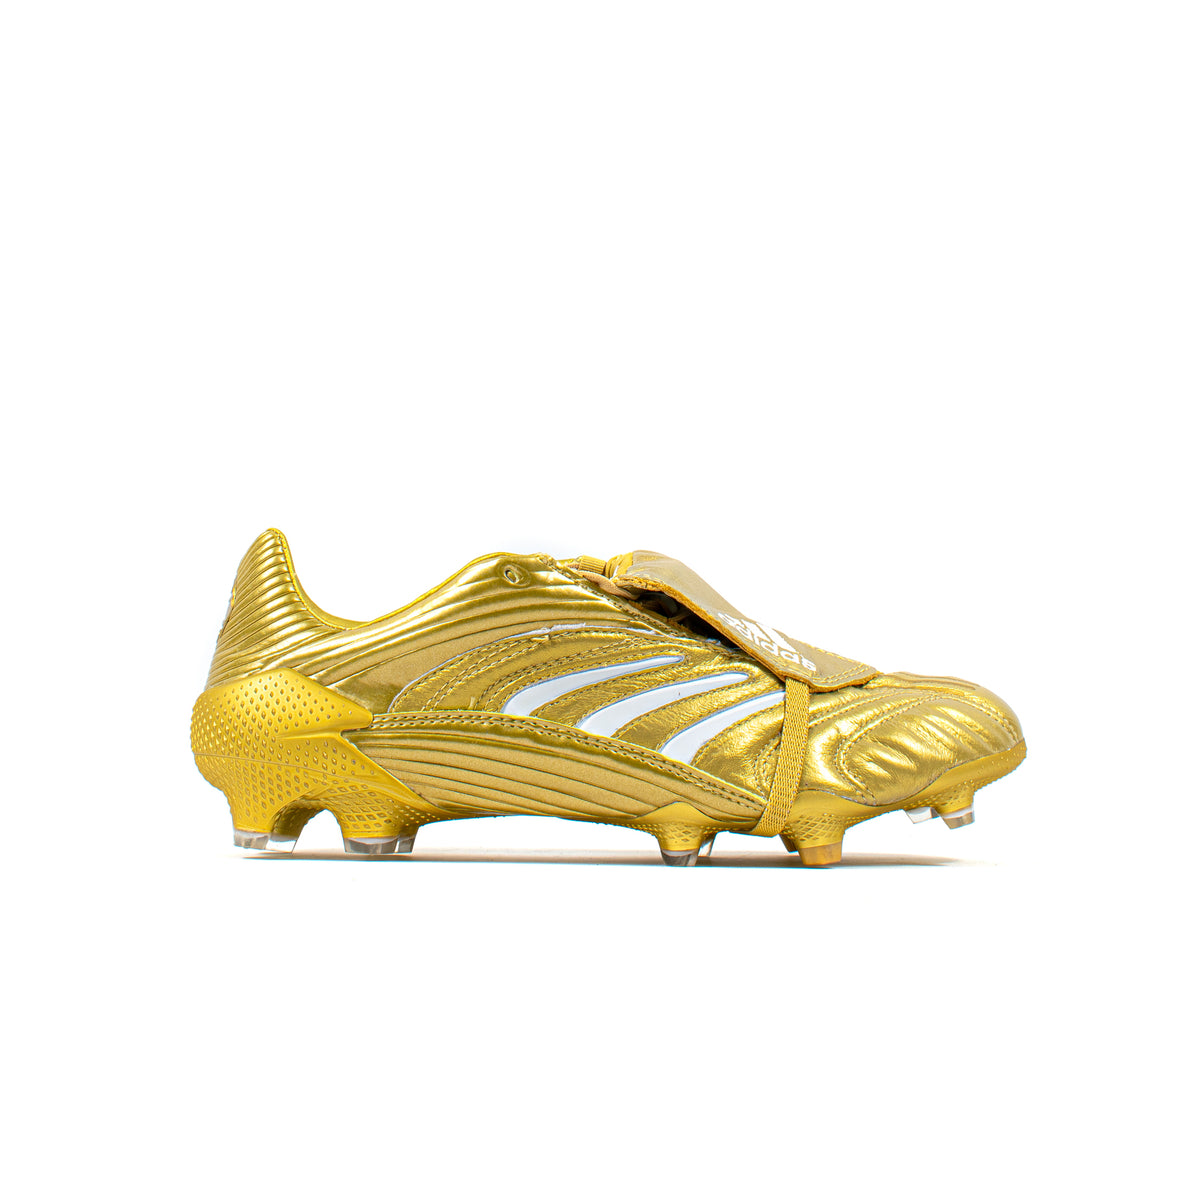 Predator Absolute Gold Remake FG – Classic Soccer Cleats